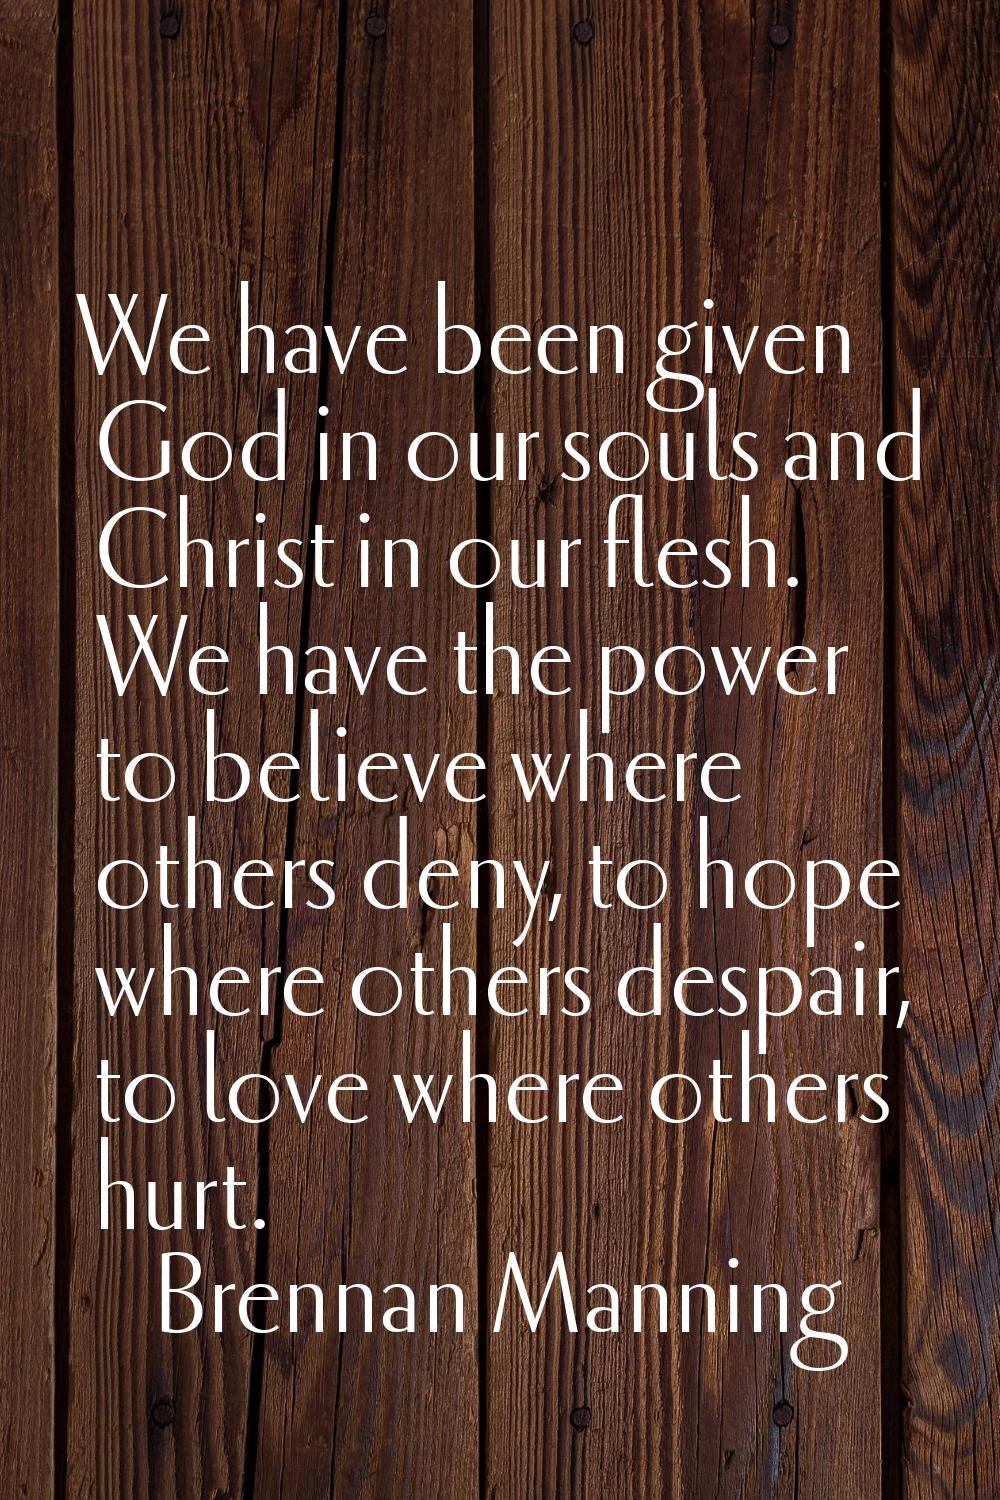 We have been given God in our souls and Christ in our flesh. We have the power to believe where oth